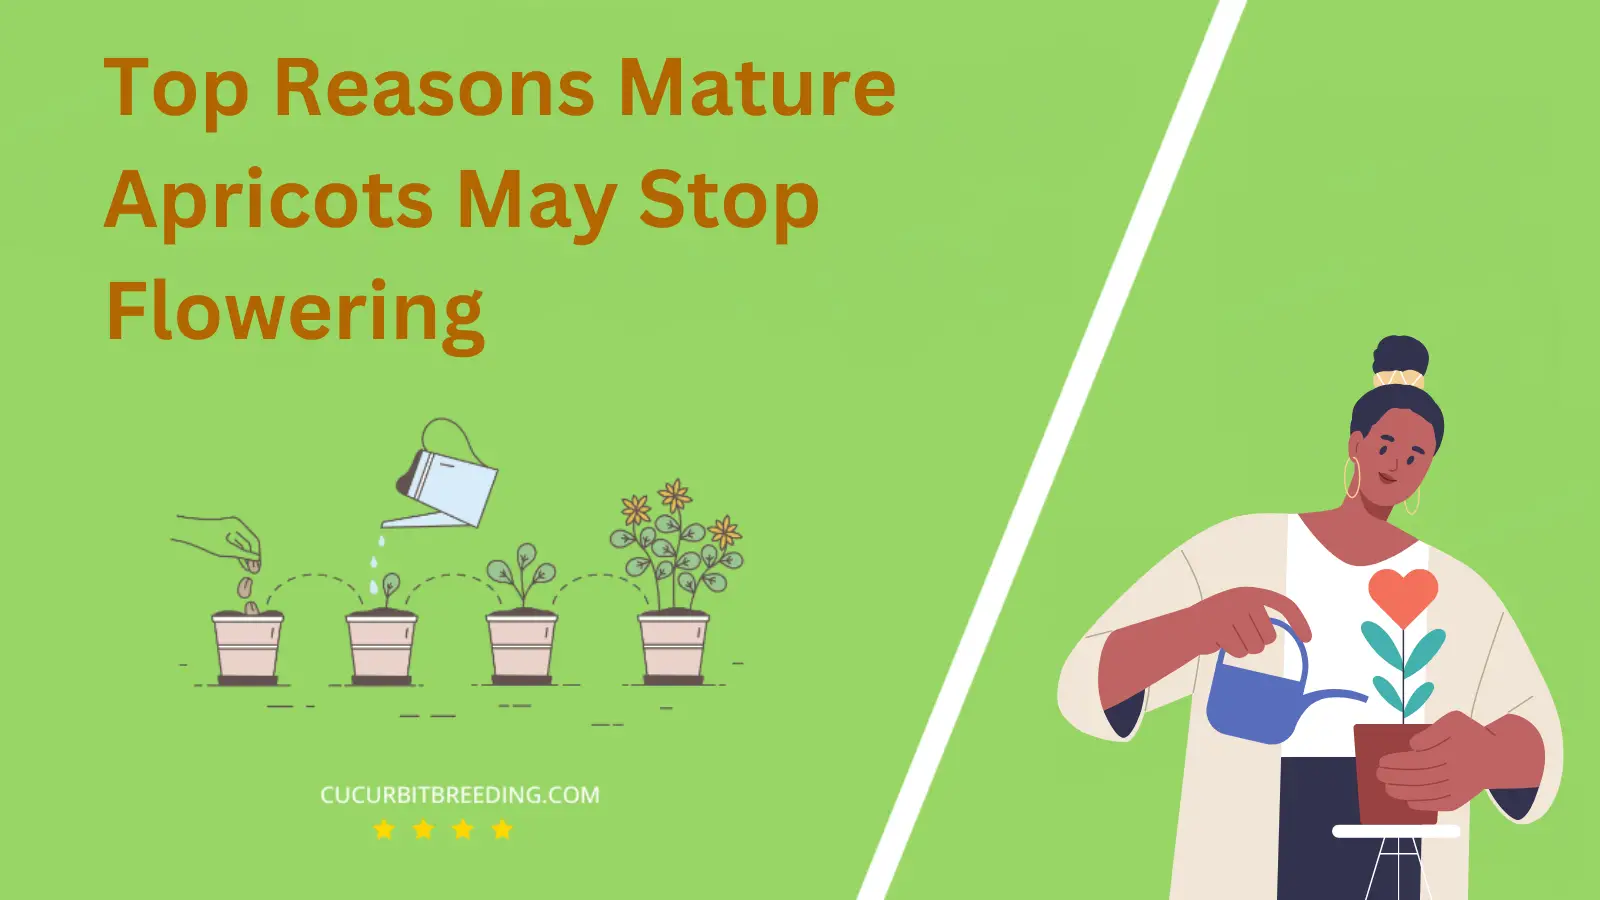 Top Reasons Mature Apricots May Stop Flowering